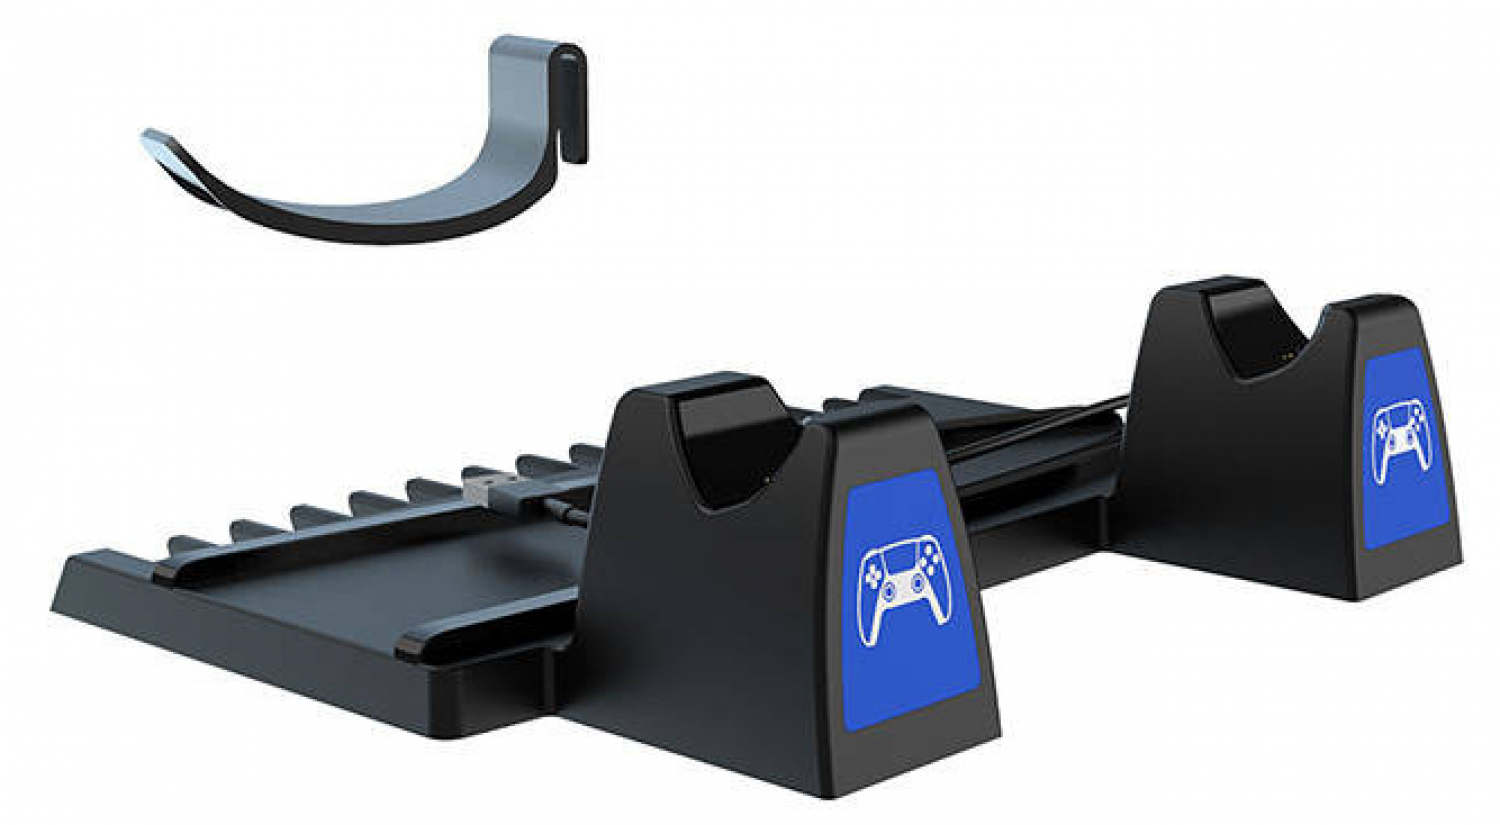 Stand iPega Multifunctional Cooling Stand for PS5 and Accessories Black (PG-P5009)